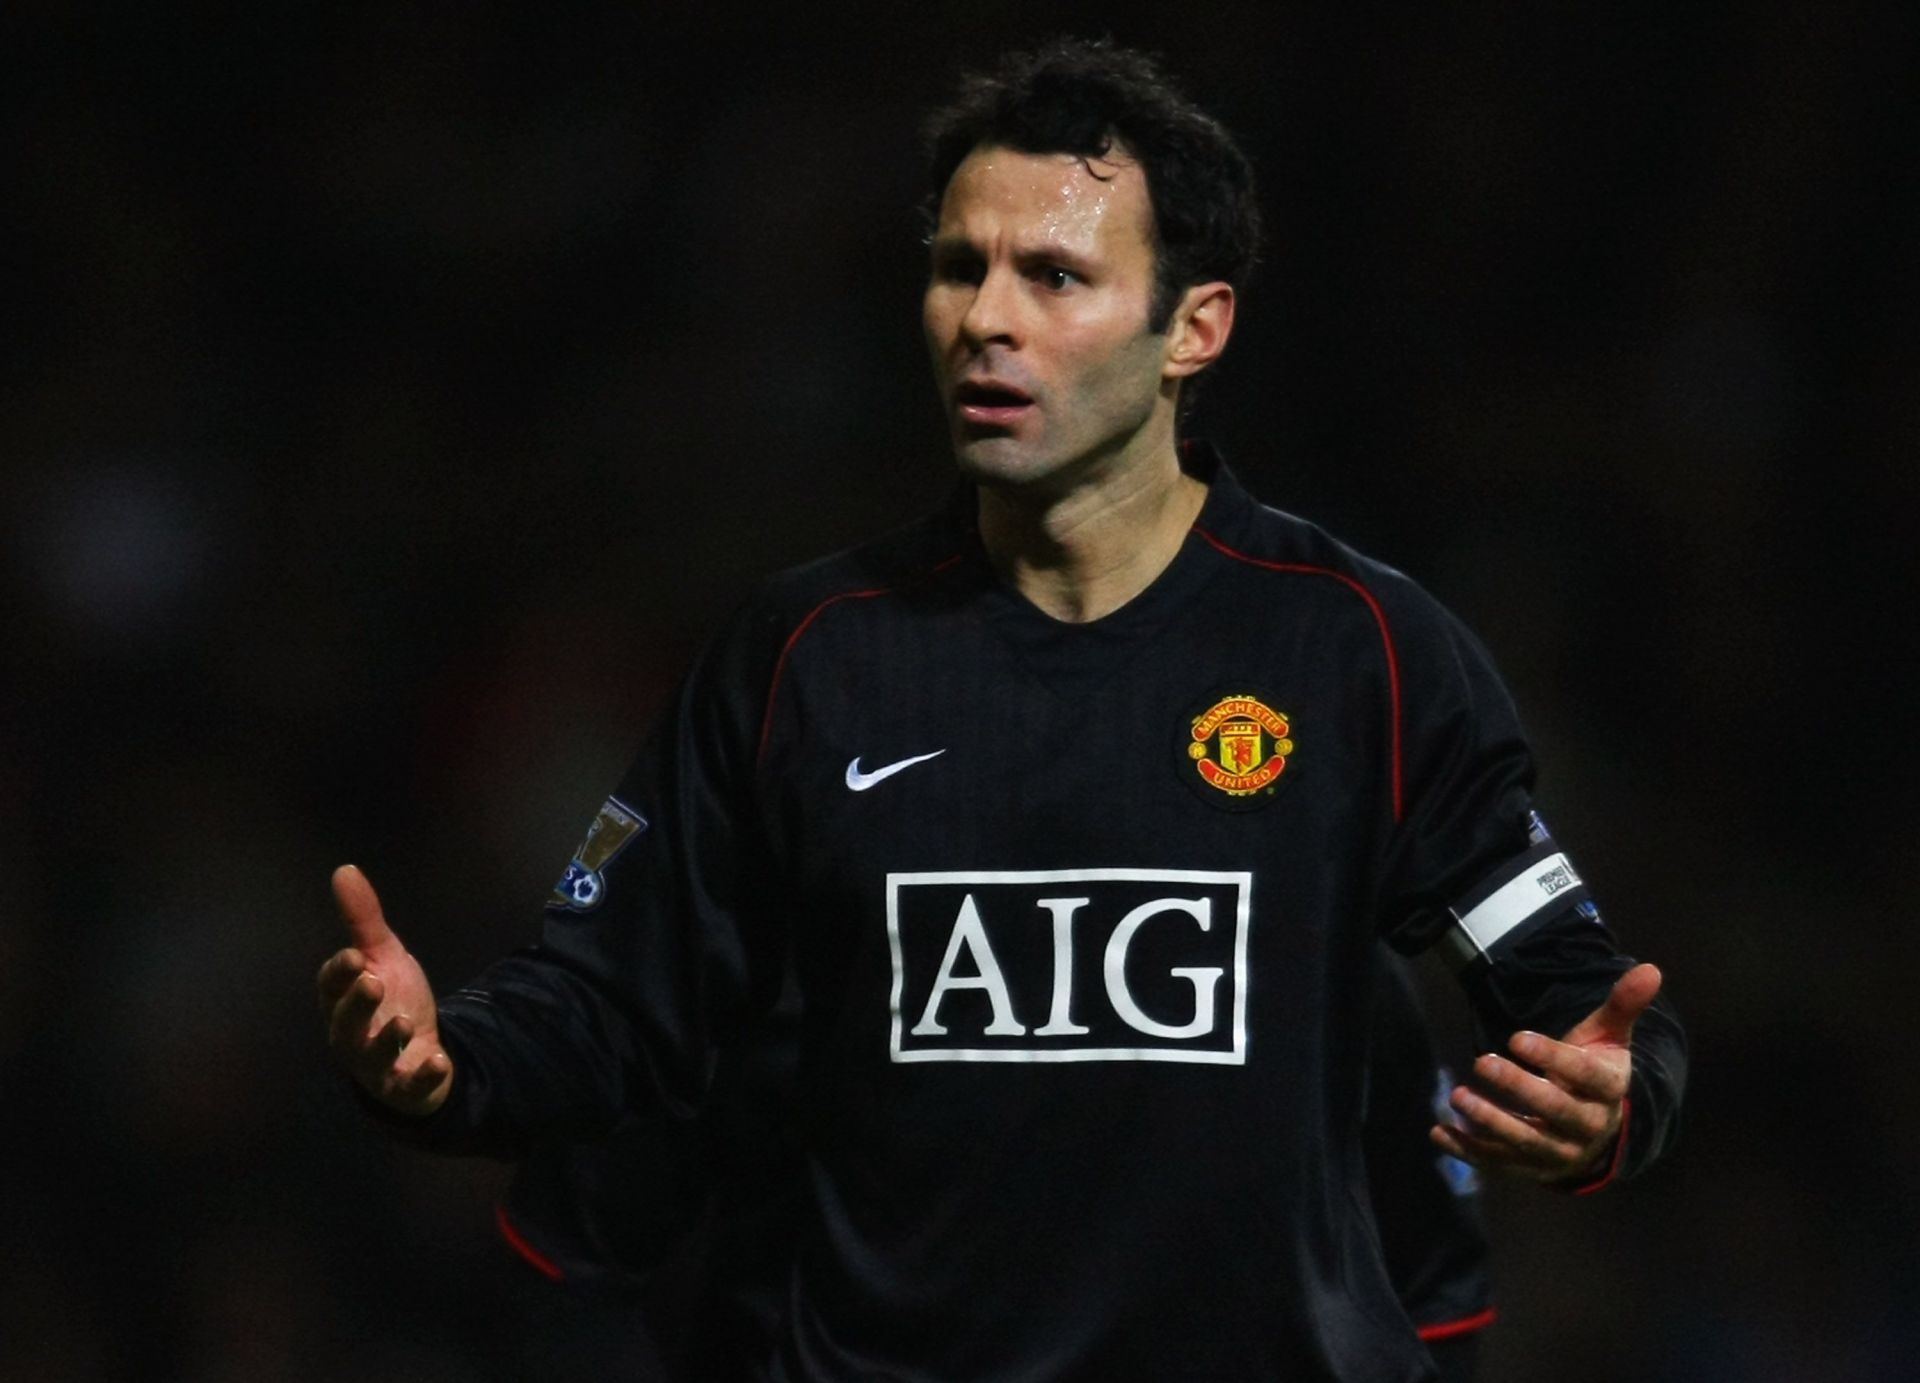 Giggs holds the record for scoring in most consecutive Premier League campaigns